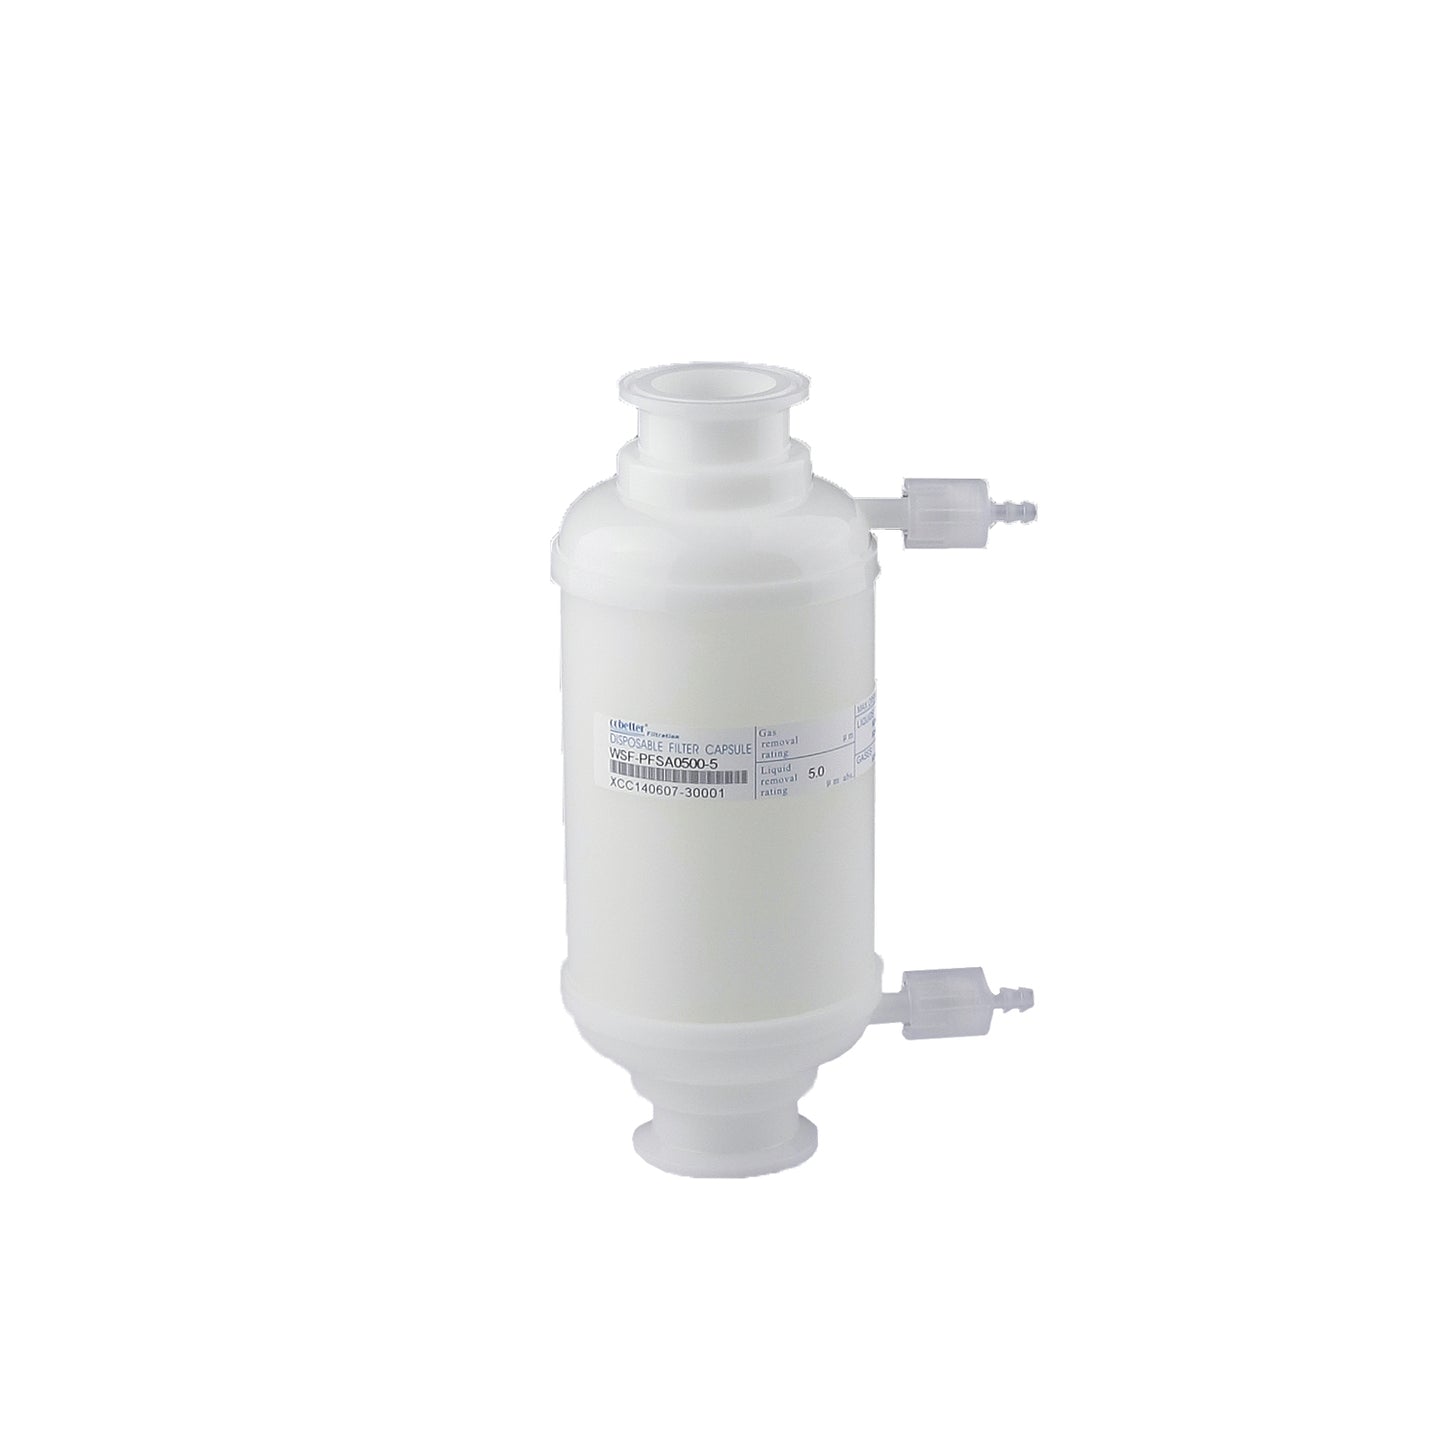 COBETTER WSF Capsule Filter PTFE for Gas Filtration Validated